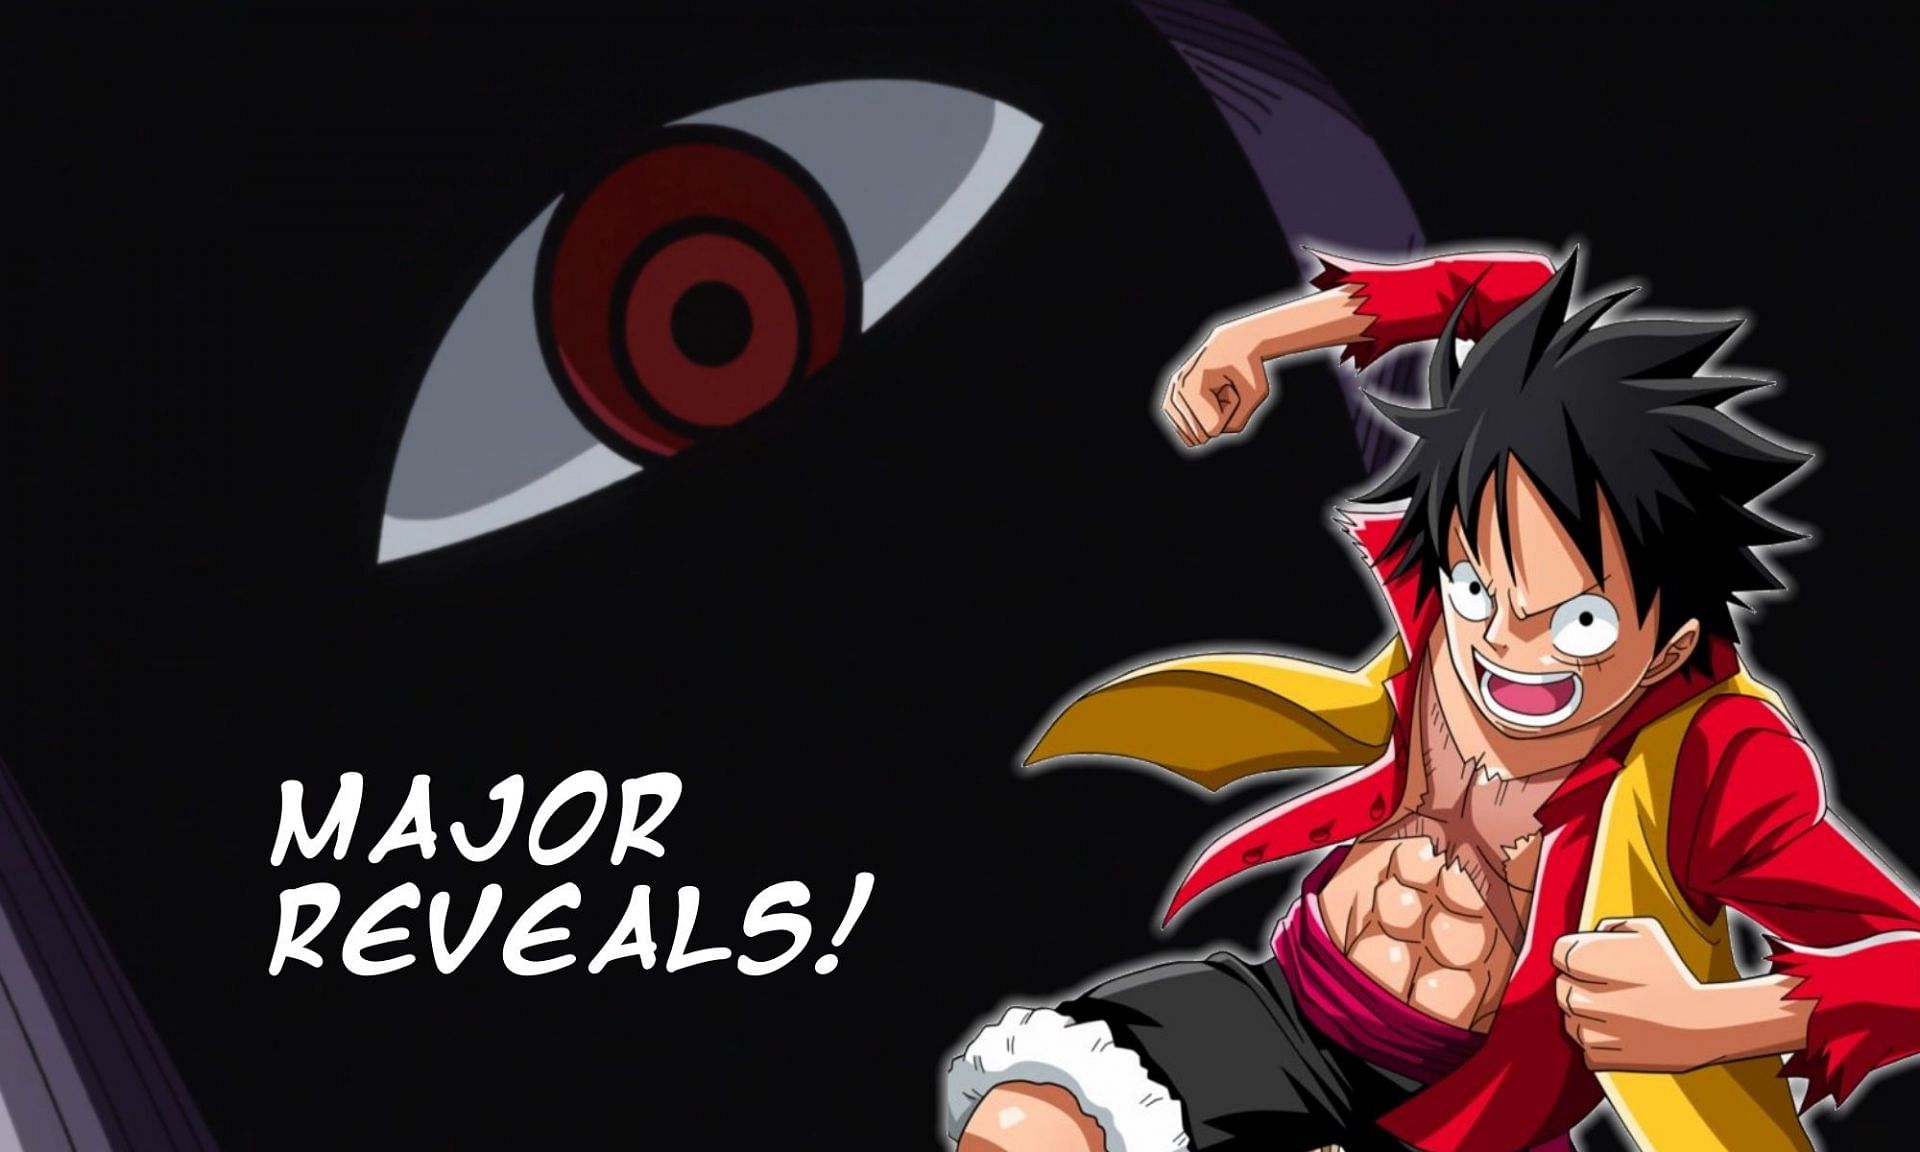 One Piece fans have been waiting for this moment for a long time